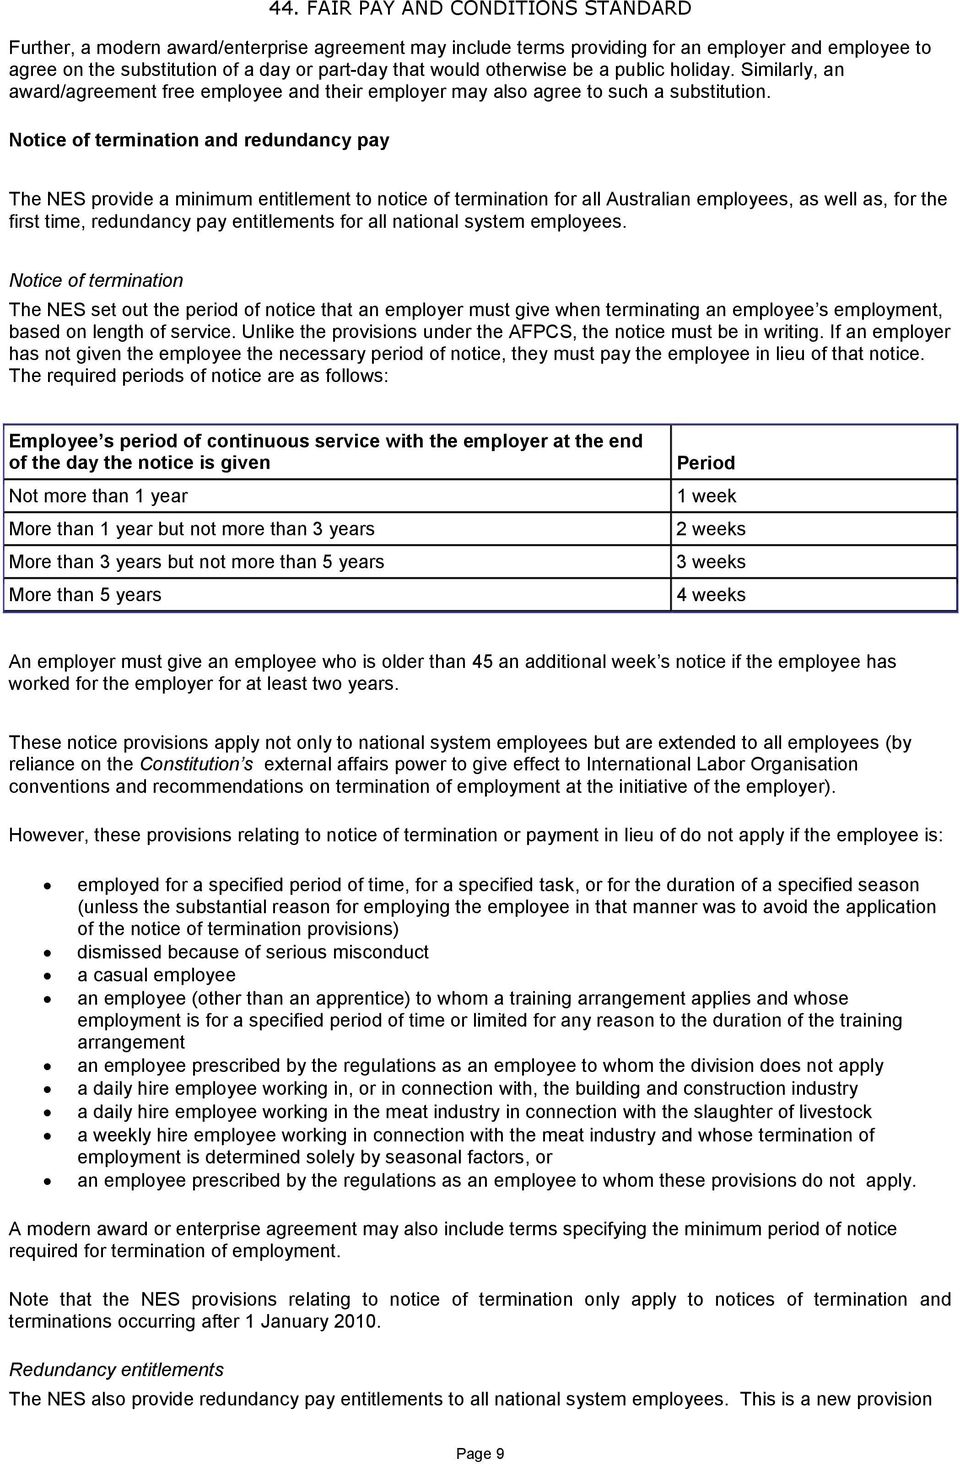 Notice of termination and redundancy pay The NES provide a minimum entitlement to notice of termination for all Australian employees, as well as, for the first time, redundancy pay entitlements for